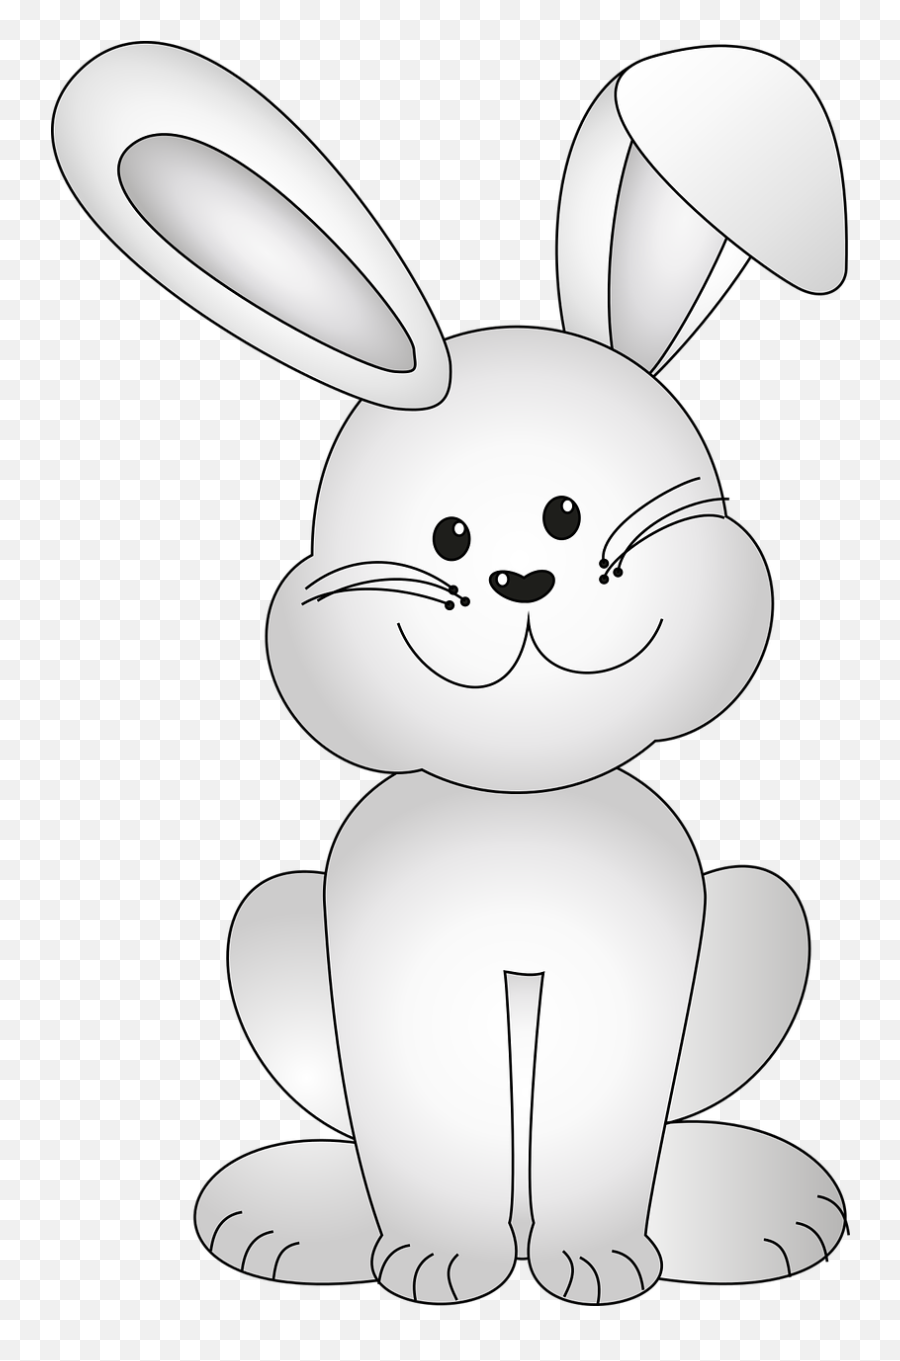 Seasonal Image Unique Products Easter - Clipart Bunny With Floppy Ears Emoji,Bunny Ears Clipart